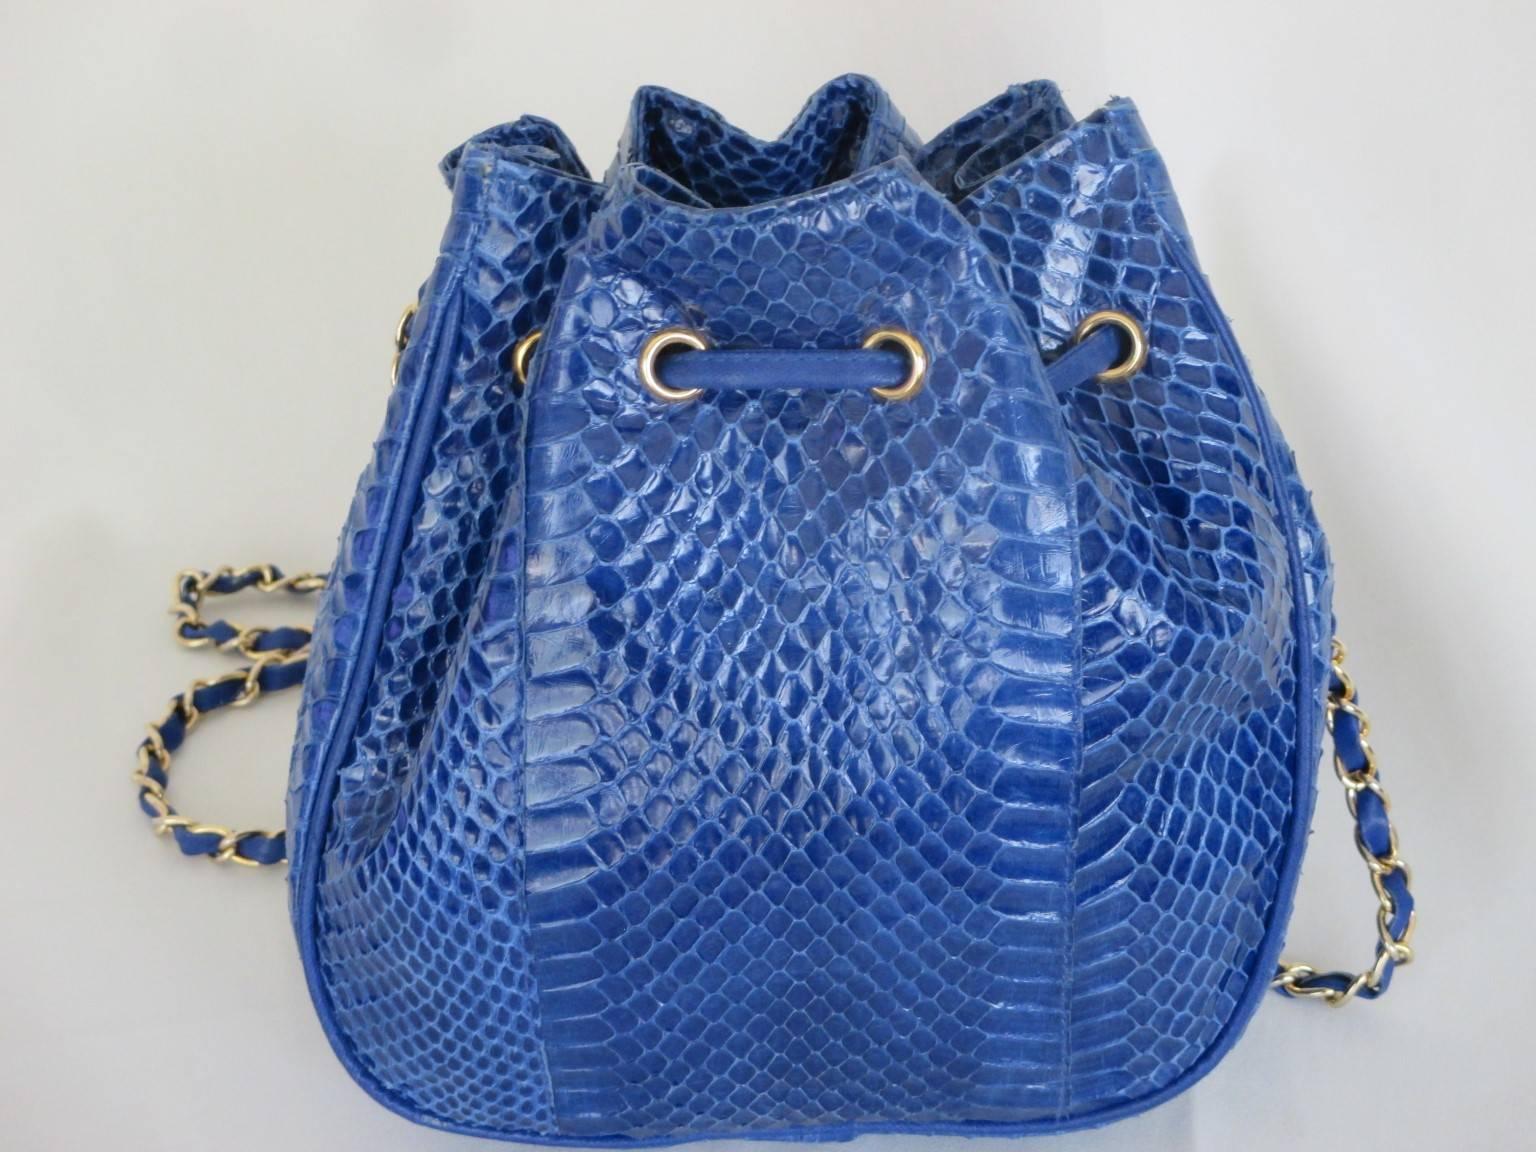 This bag is made from very soft dyed blue python leather.
Fully leather lined with internal zip
The size of the shoulder strap is 135 cm
Size is 21 cm x 22 cm x 9 cm
Please note that vintage items are not new and therefore might have minor